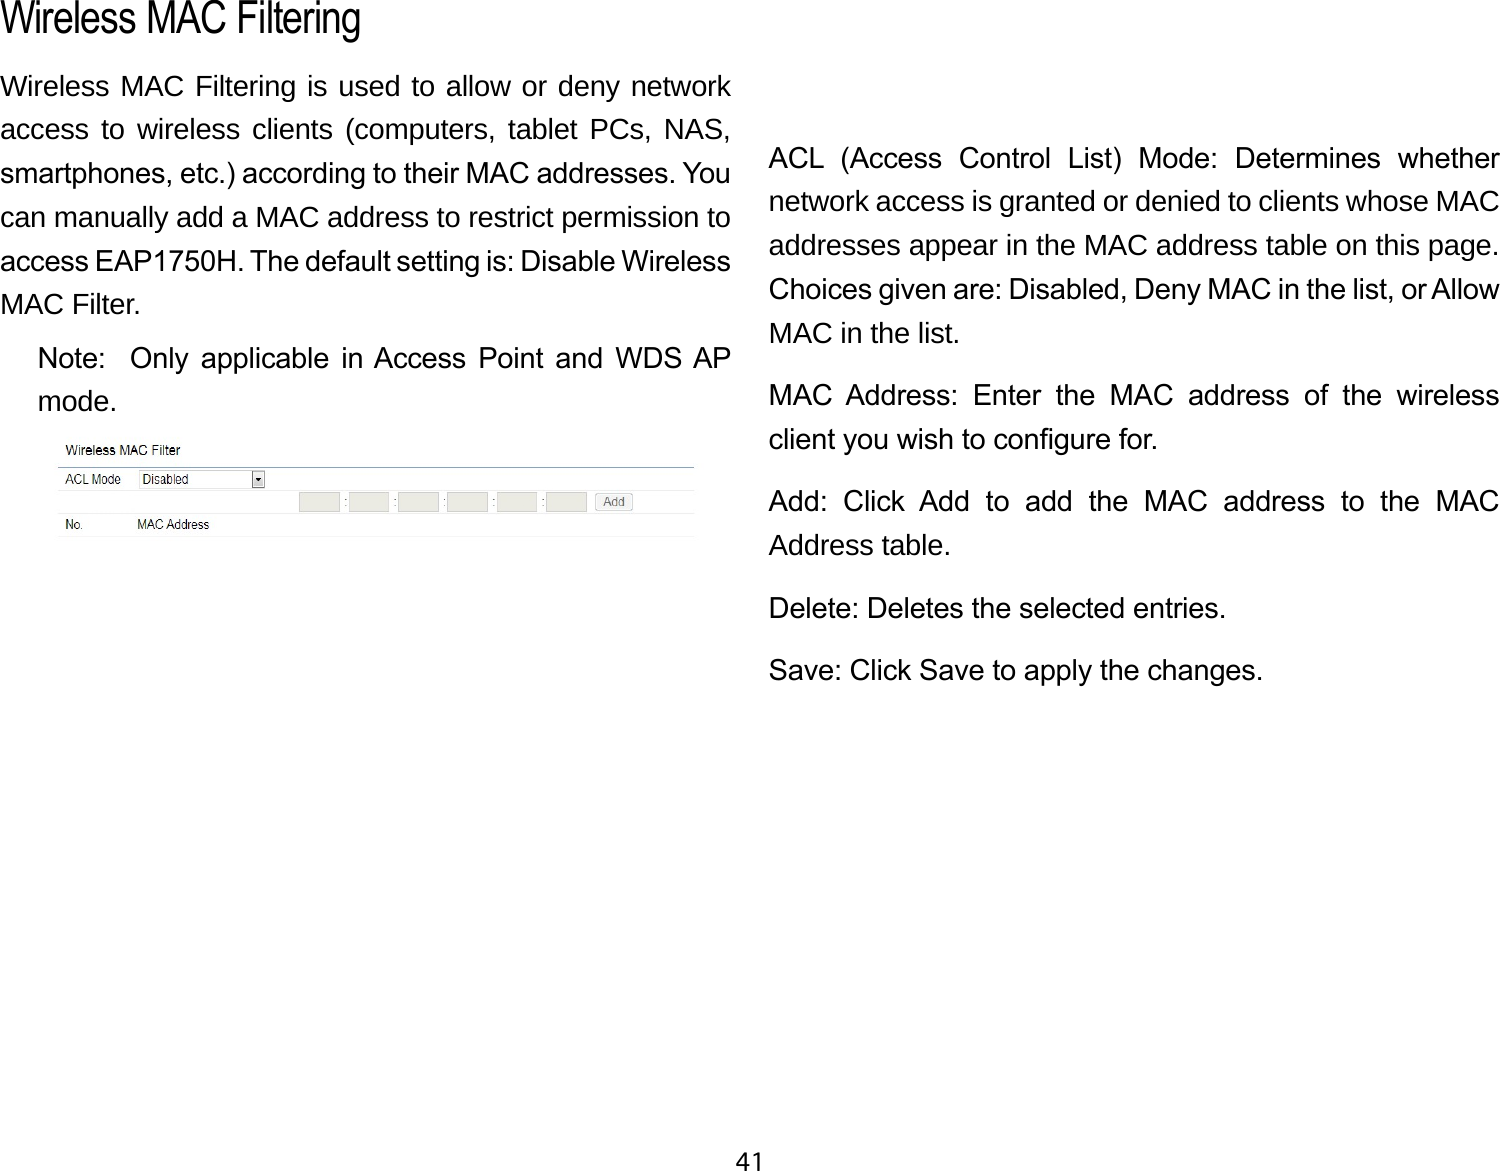 41Wireless MAC Filtering is used to allow or deny network access to wireless clients (computers, tablet PCs, NAS, smartphones, etc.) according to their MAC addresses. You can manually add a MAC address to restrict permission to access EAP1750H. The default setting is: Disable Wireless MAC Filter.Note:    Only  applicable  in Access  Point  and  WDS AP mode.ACL  (Access  Control  List)  Mode:  Determines  whether network access is granted or denied to clients whose MAC addresses appear in the MAC address table on this page. Choices given are: Disabled, Deny MAC in the list, or Allow MAC in the list.MAC  Address:  Enter  the  MAC  address  of  the  wireless client you wish to congure for.Add:  Click  Add  to  add  the  MAC  address  to  the  MAC Address table.Delete: Deletes the selected entries.Save: Click Save to apply the changes.Wireless MAC Filtering